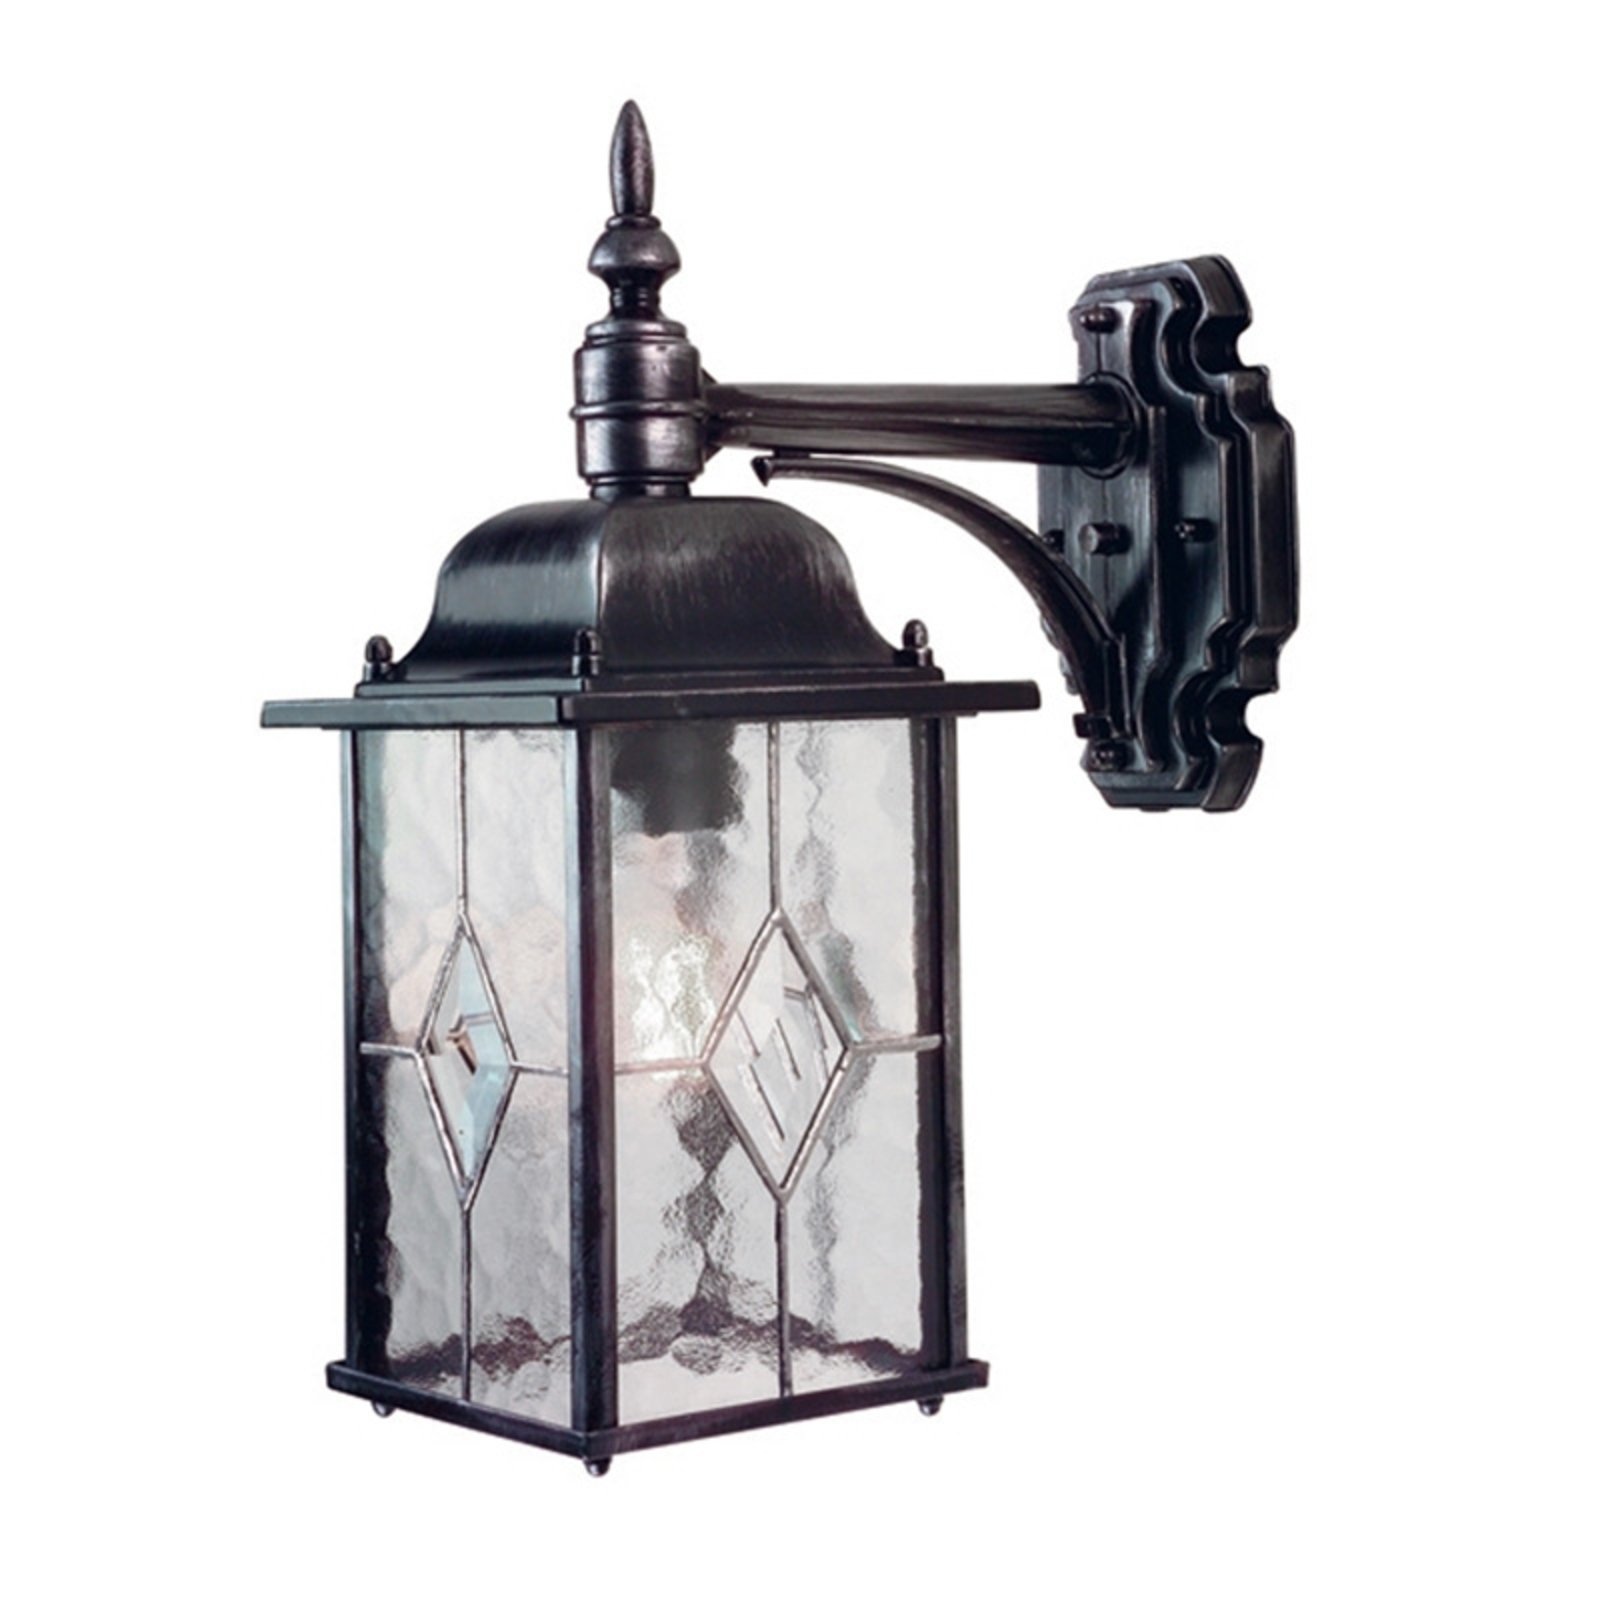 Wexford WX2 outdoor wall light, hanging lantern